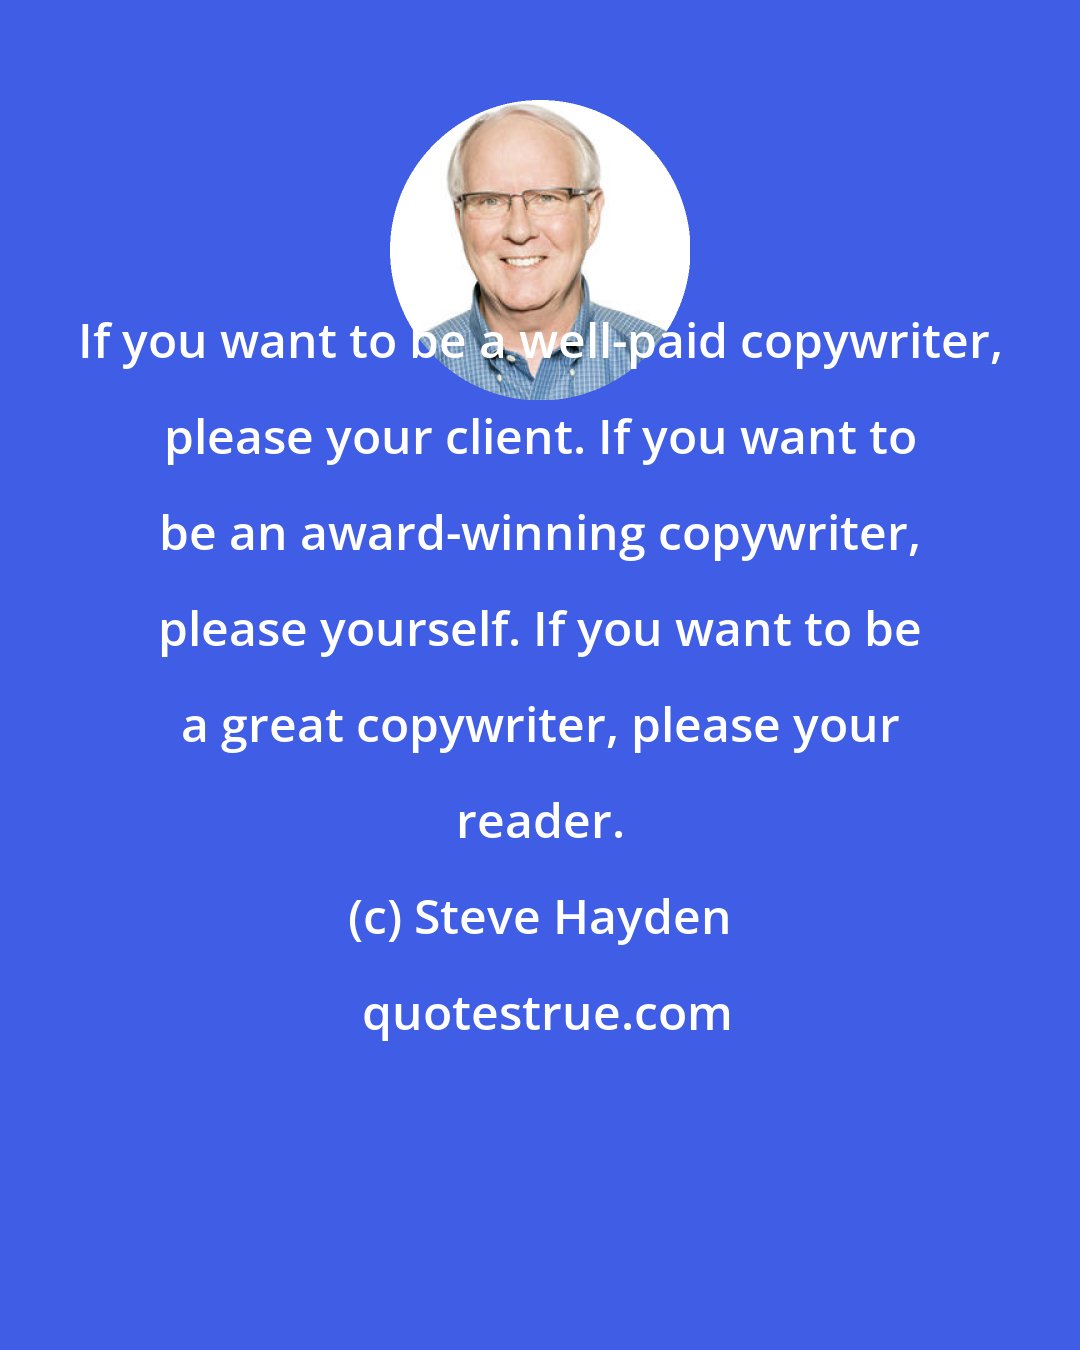 Steve Hayden: If you want to be a well-paid copywriter, please your client. If you want to be an award-winning copywriter, please yourself. If you want to be a great copywriter, please your reader.